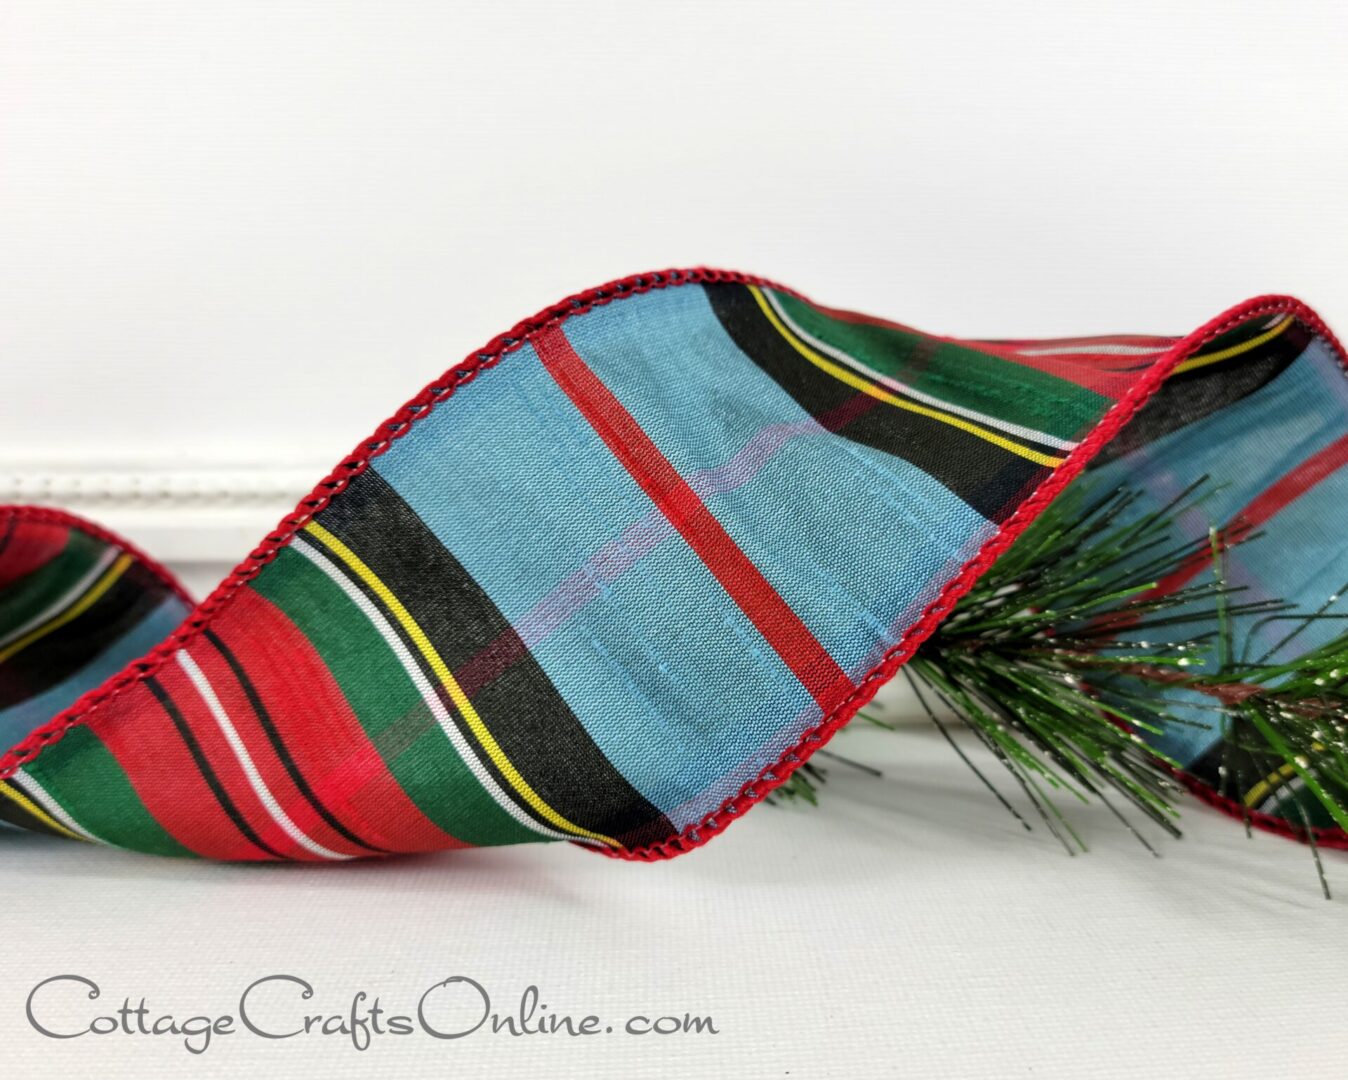 Horizontal stripes blue red green black with narrow yellow white 2.5" wide wired ribbon from the Etsy shop of Cottage Crafts Online.